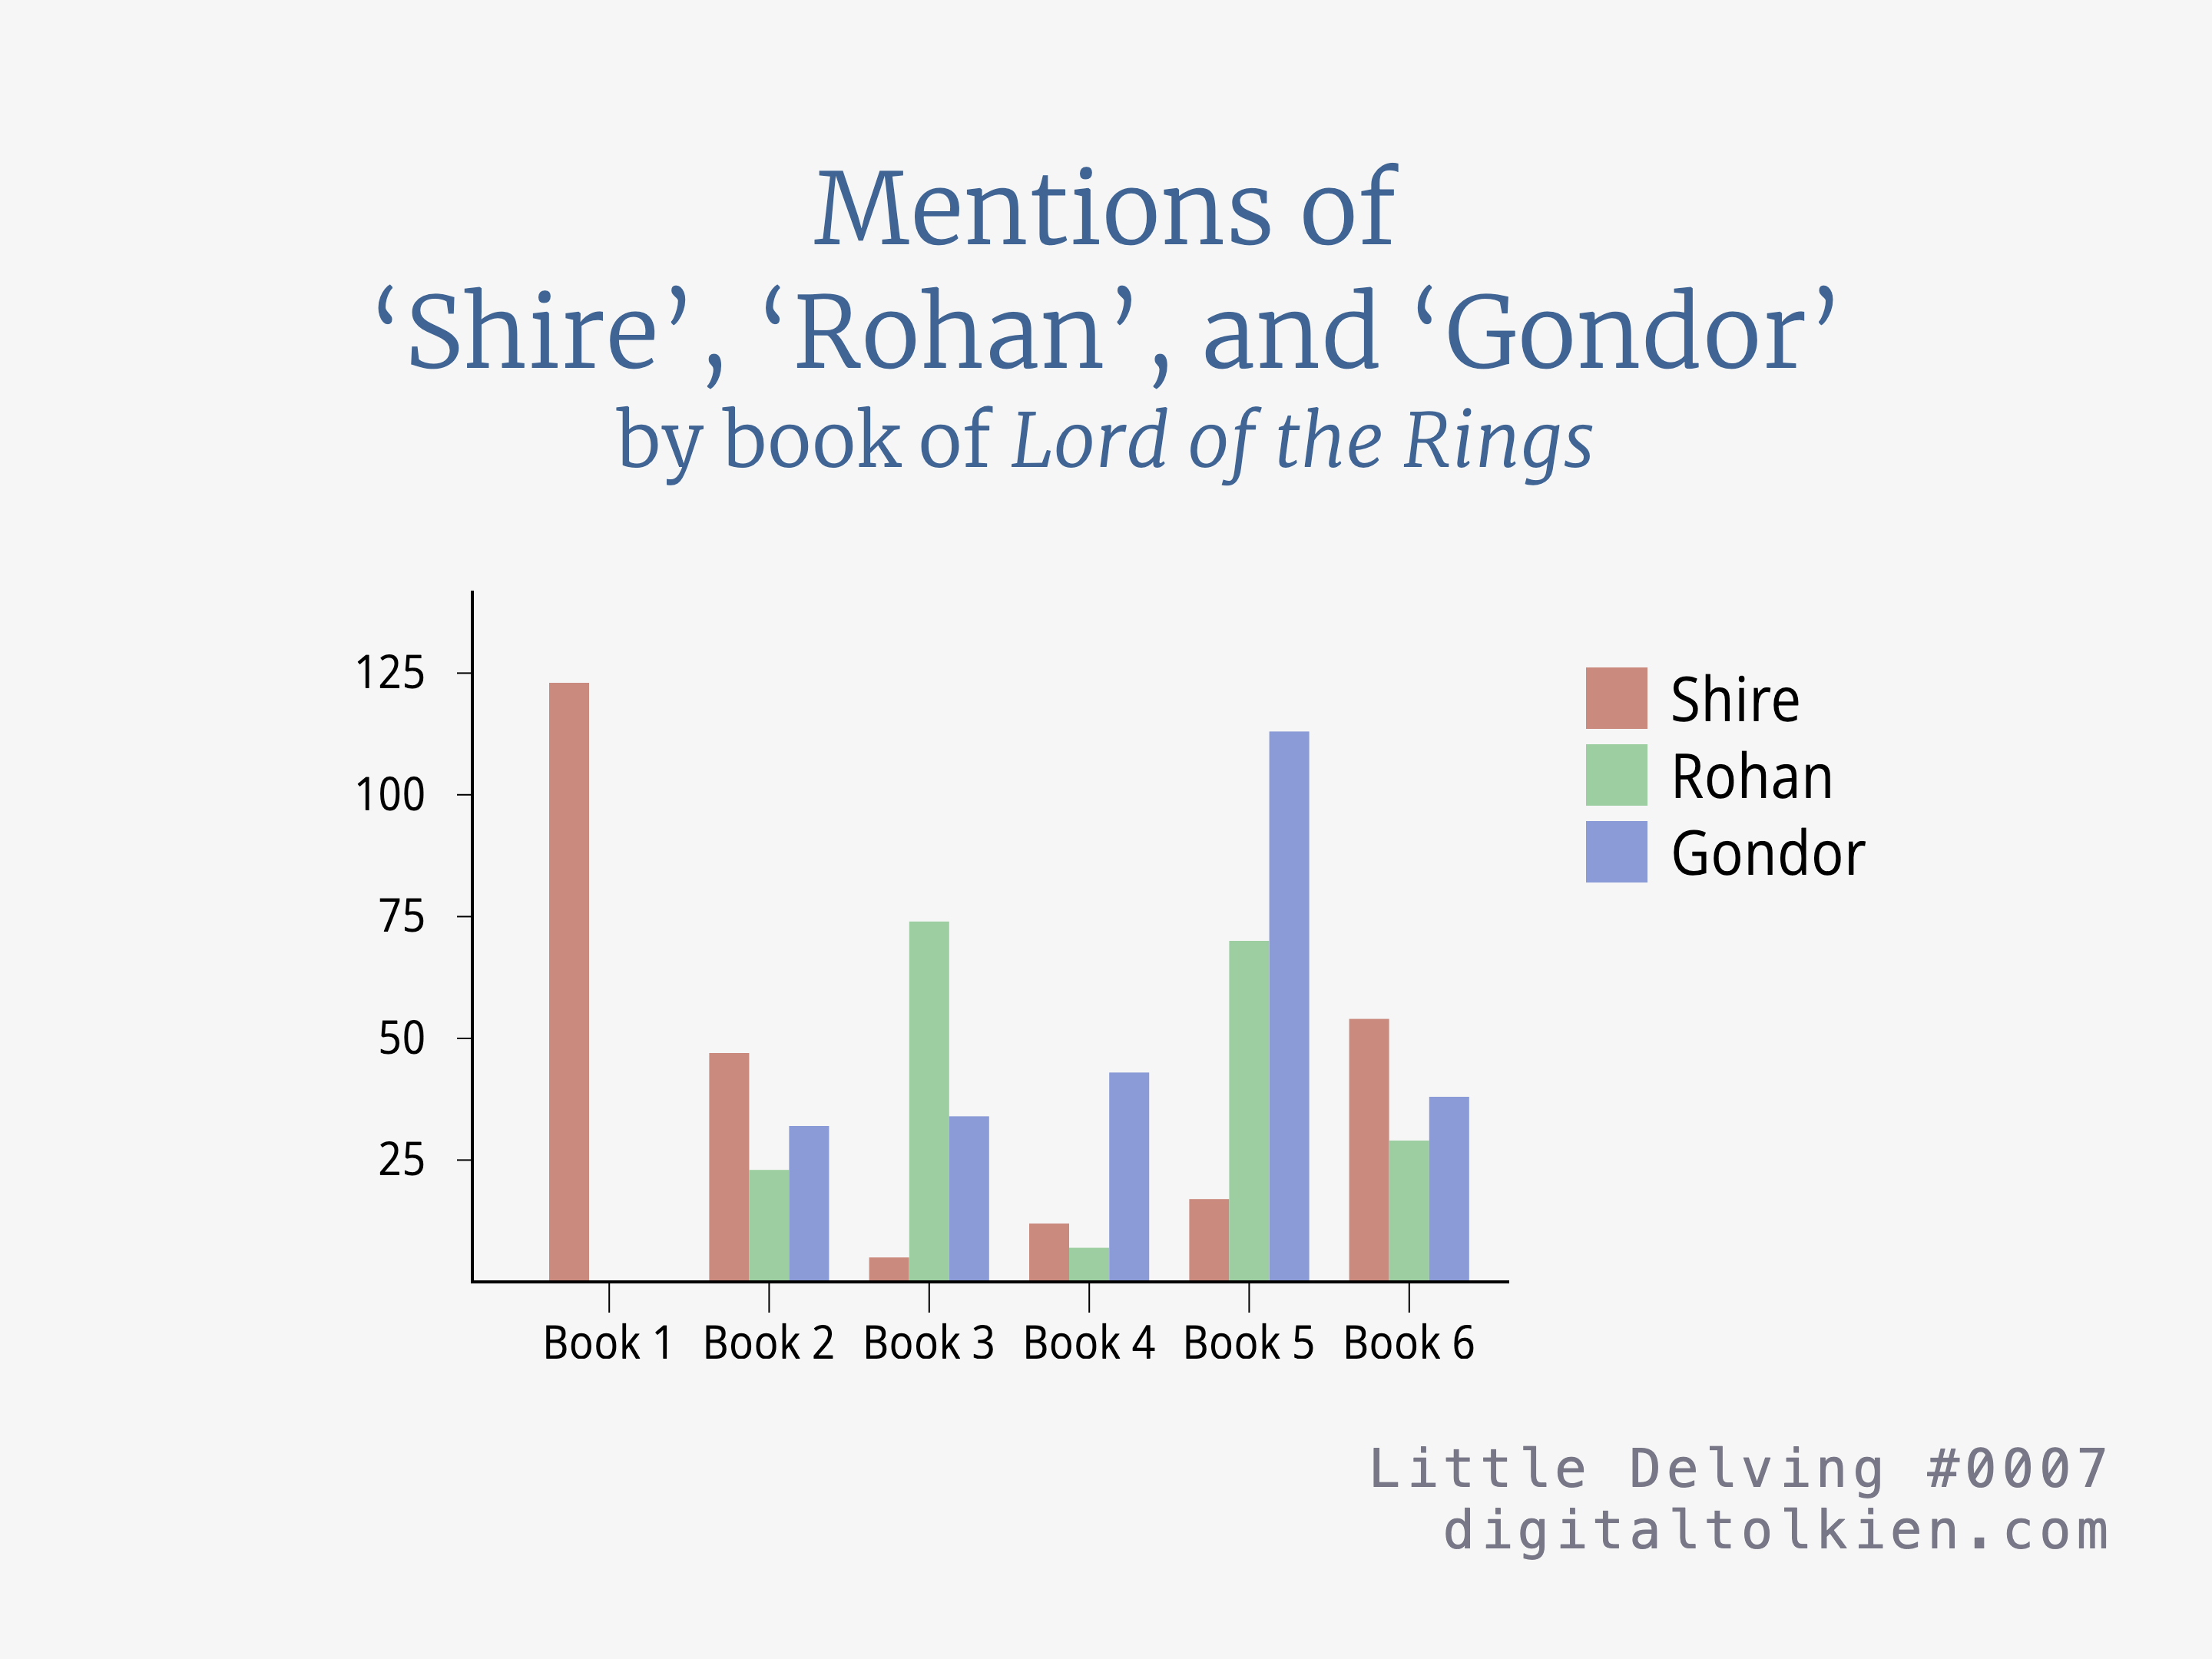 Mentions of ‘Shire’, ‘Rohan’, and ’Gondor’ by book of Lord of the Rings
        Bar chart showing counts of Shire, Rohan, and Gondor for each book.
        Counts for Shire by book are 123, 47, 5, 12, 17, 54.
        Counts for Rohan by book are 0, 23, 74, 7, 70, 29.
        Counts for Gondor by book are 0, 32, 34, 43, 113, 38.
        Little Delving #0007
        digitaltolkien.com